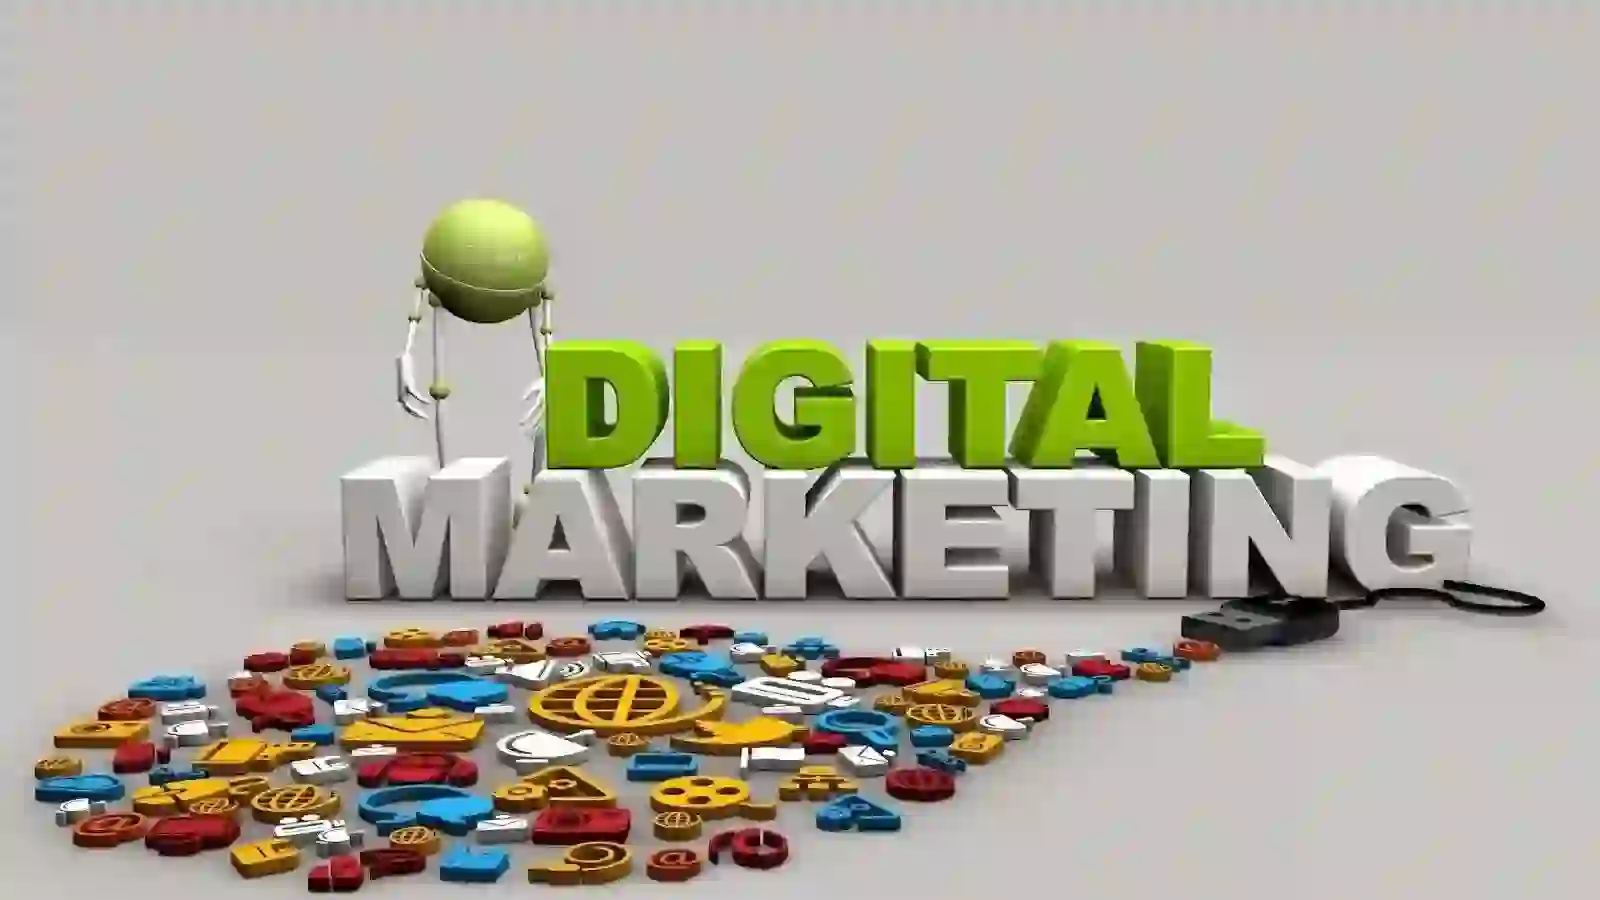 Digital marketing pay after placement course